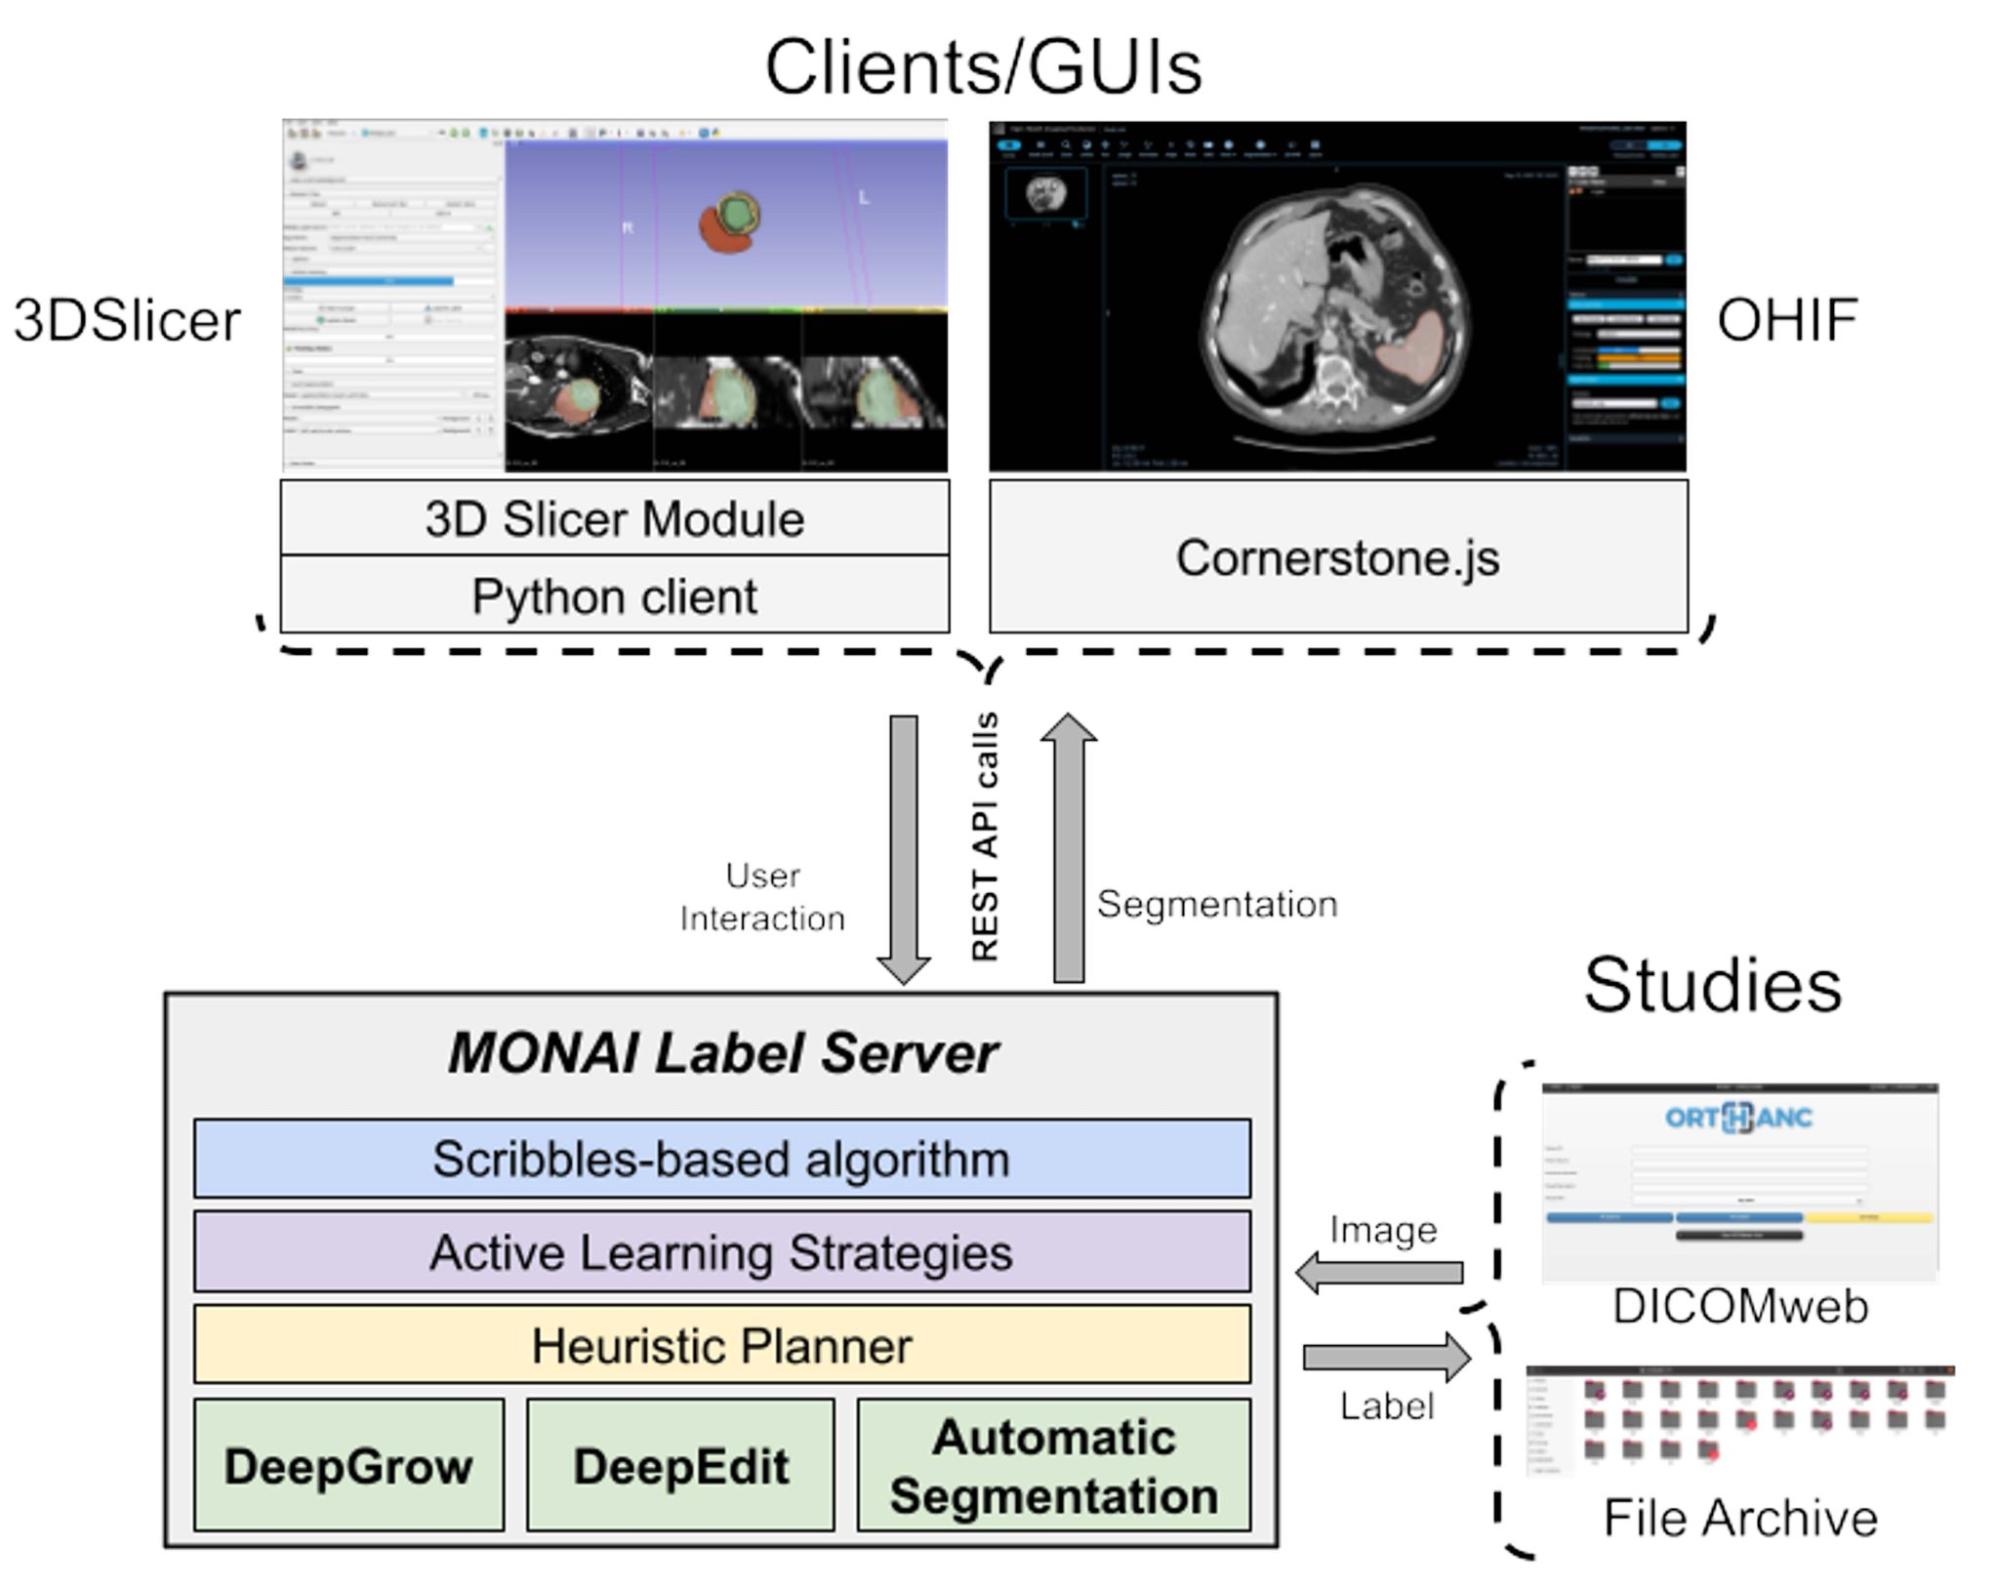 MONAI Label bridges the researchers world with clinical collaborators and can be integrated into any viewer, including 3D slicer and OHIF